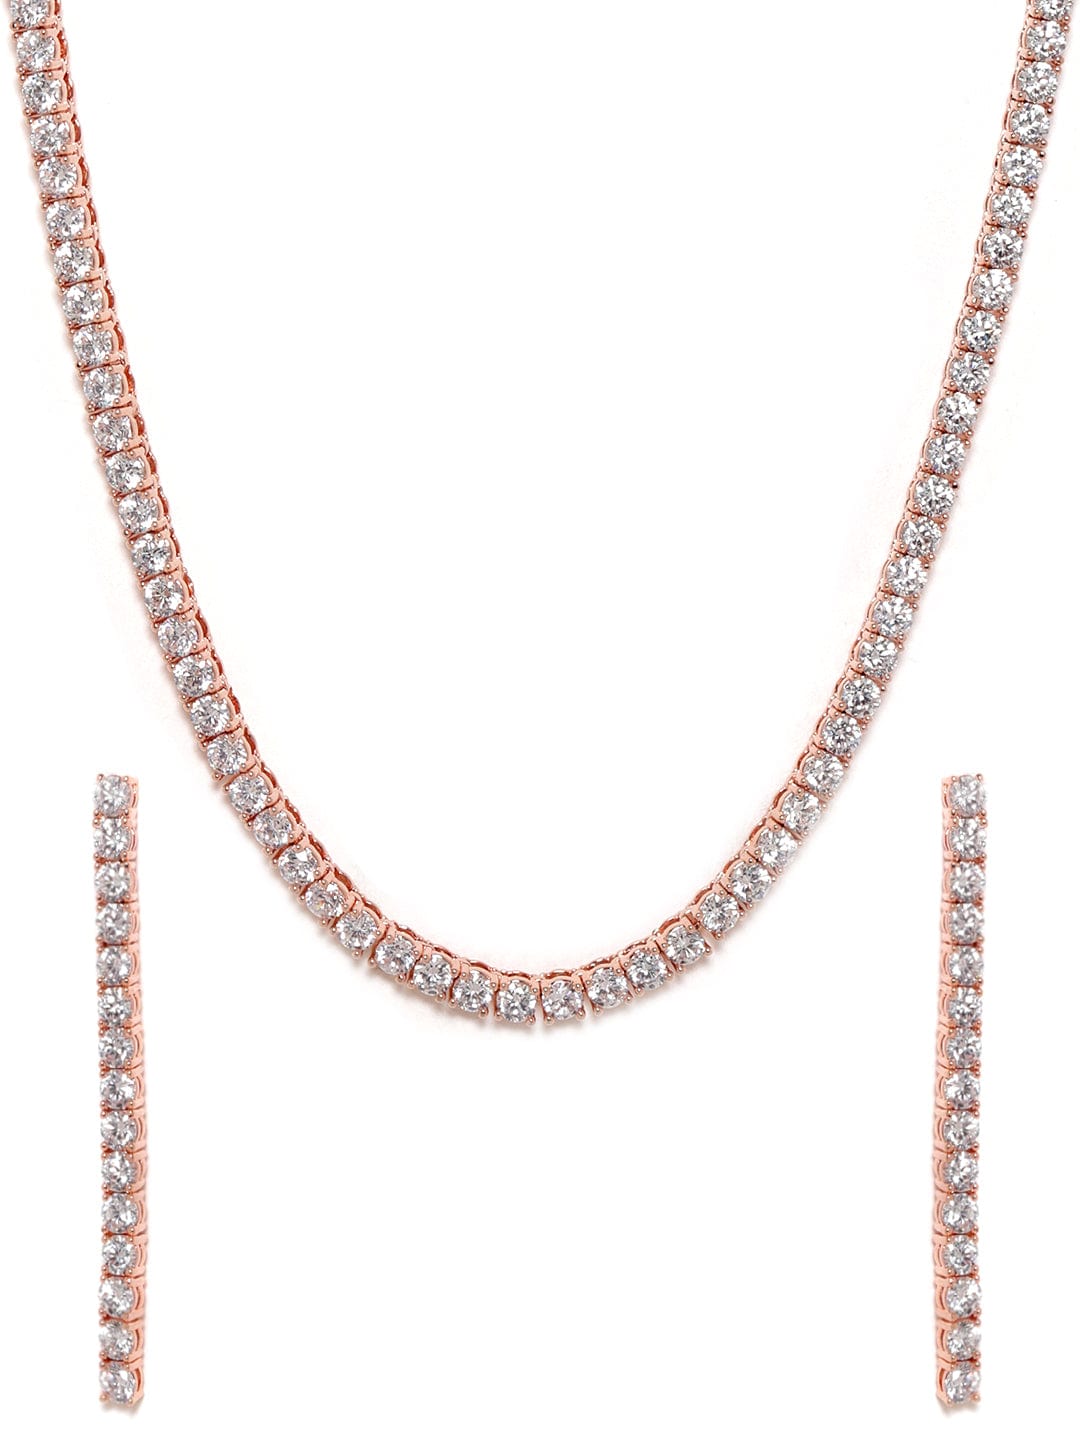 Cubic Zirconia Diamond Necklace Earrings Set, Rose Gold, Silver Bridal  Necklace Earrings Jewelry Statement Necklace Set CZ Necklace Set - Etsy